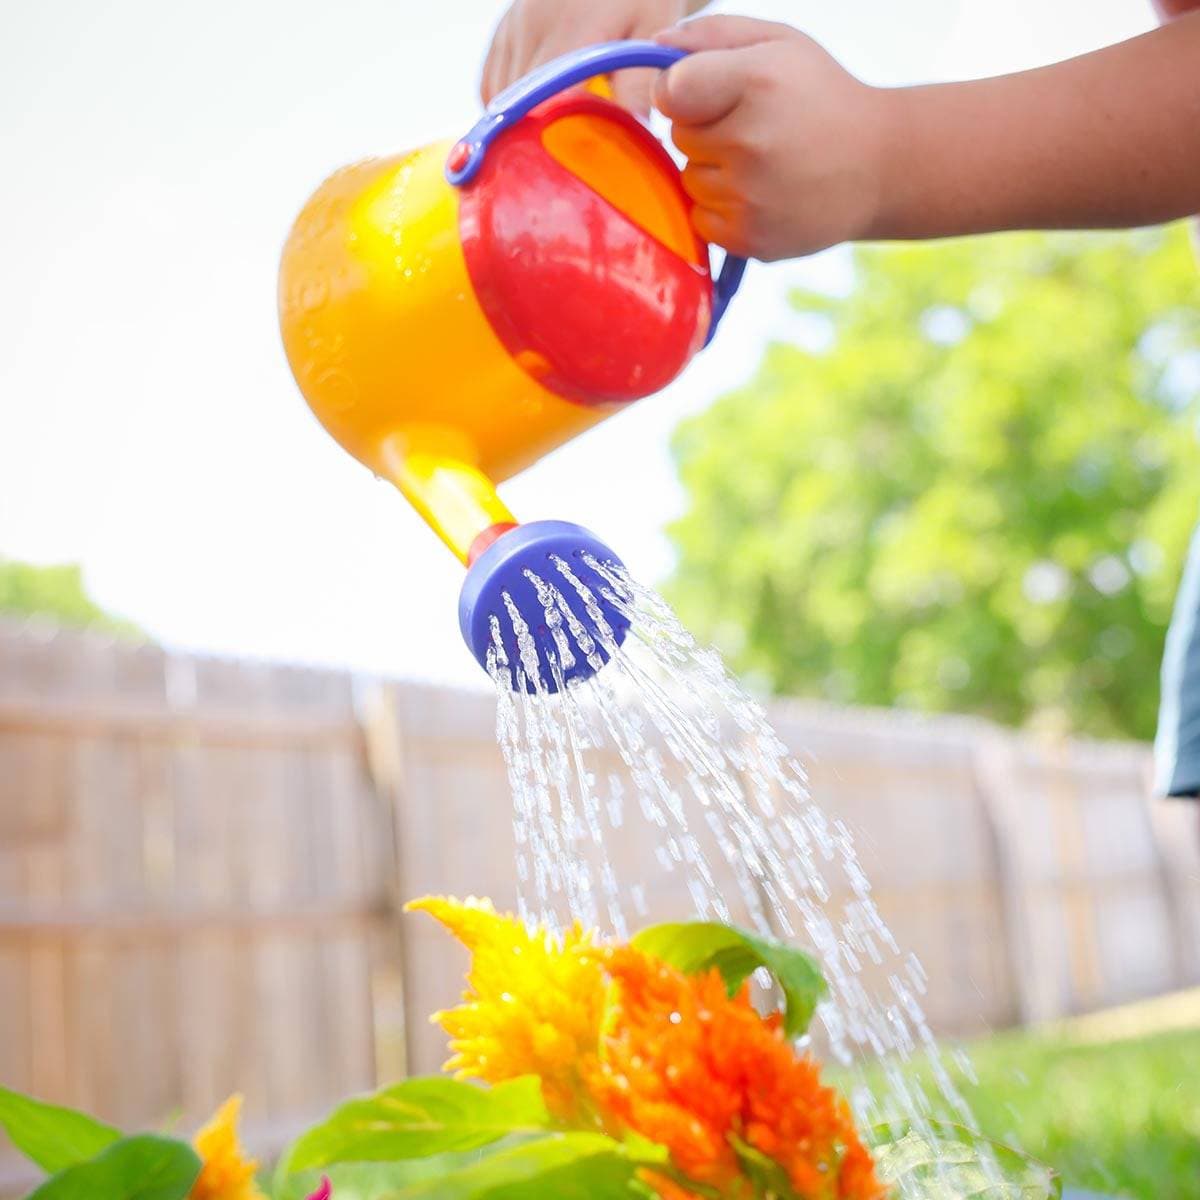 Watering Can (1 Liter) - HABA USA